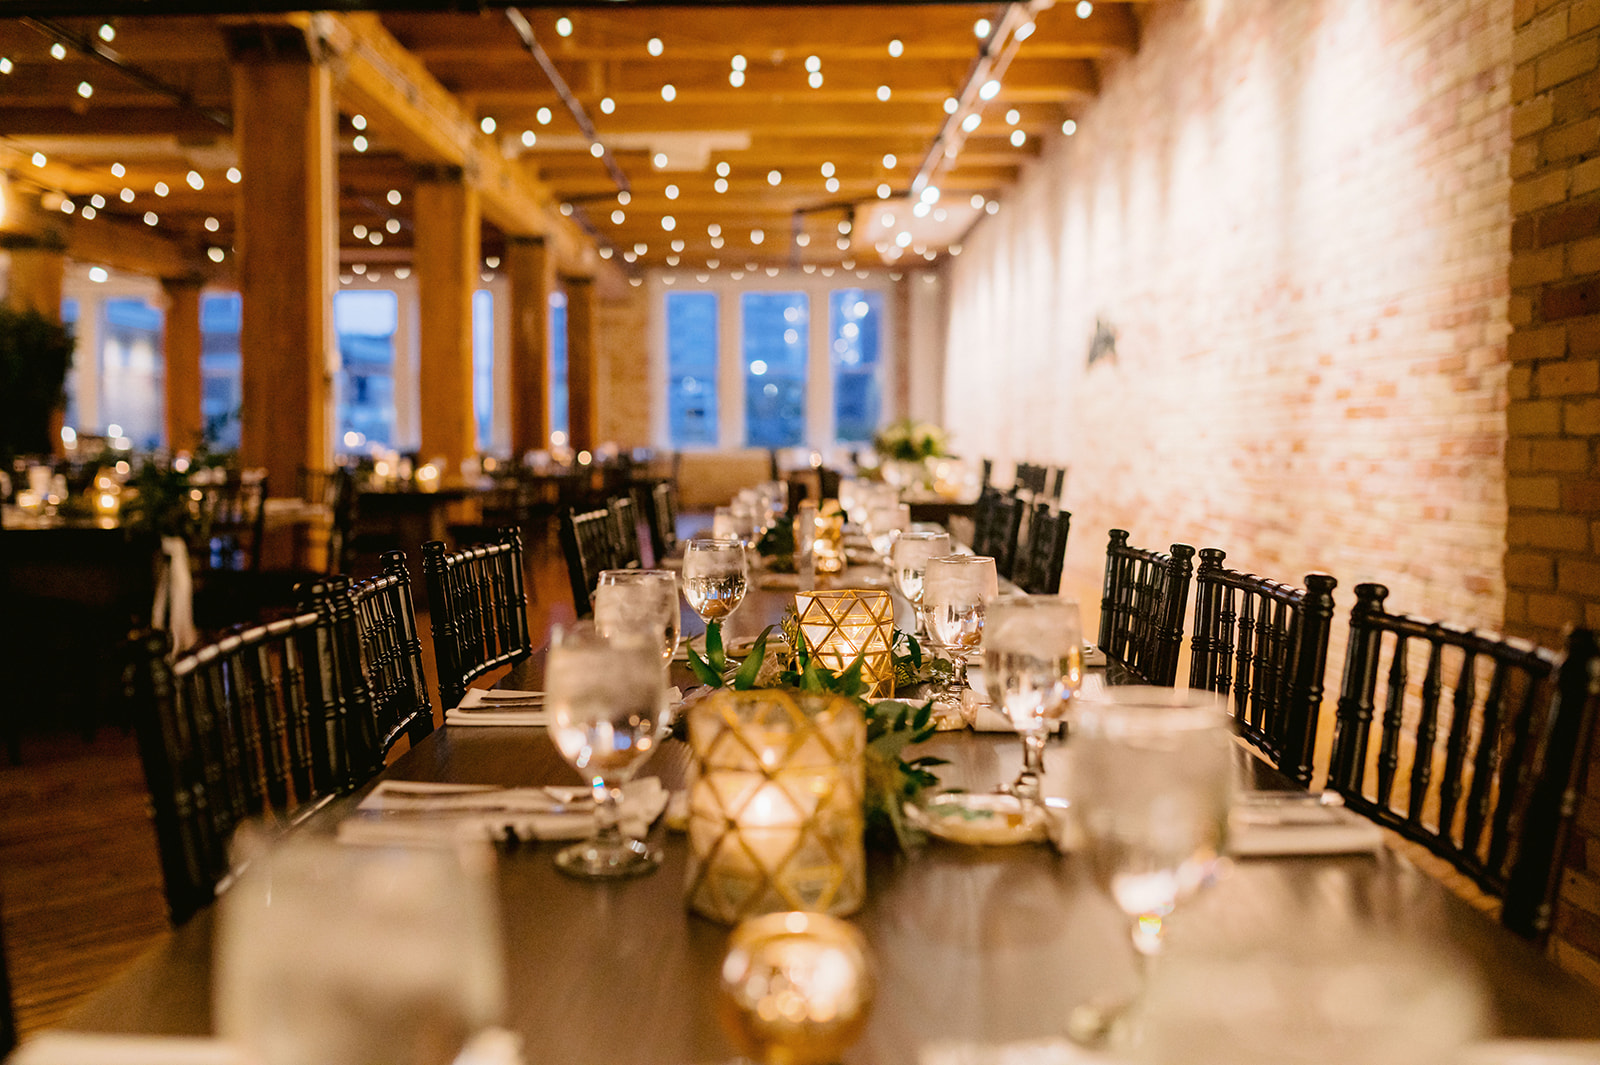 The 10 Best Wedding Venues in Chicago: Romantic wedding reception setup in Cafe Brauer